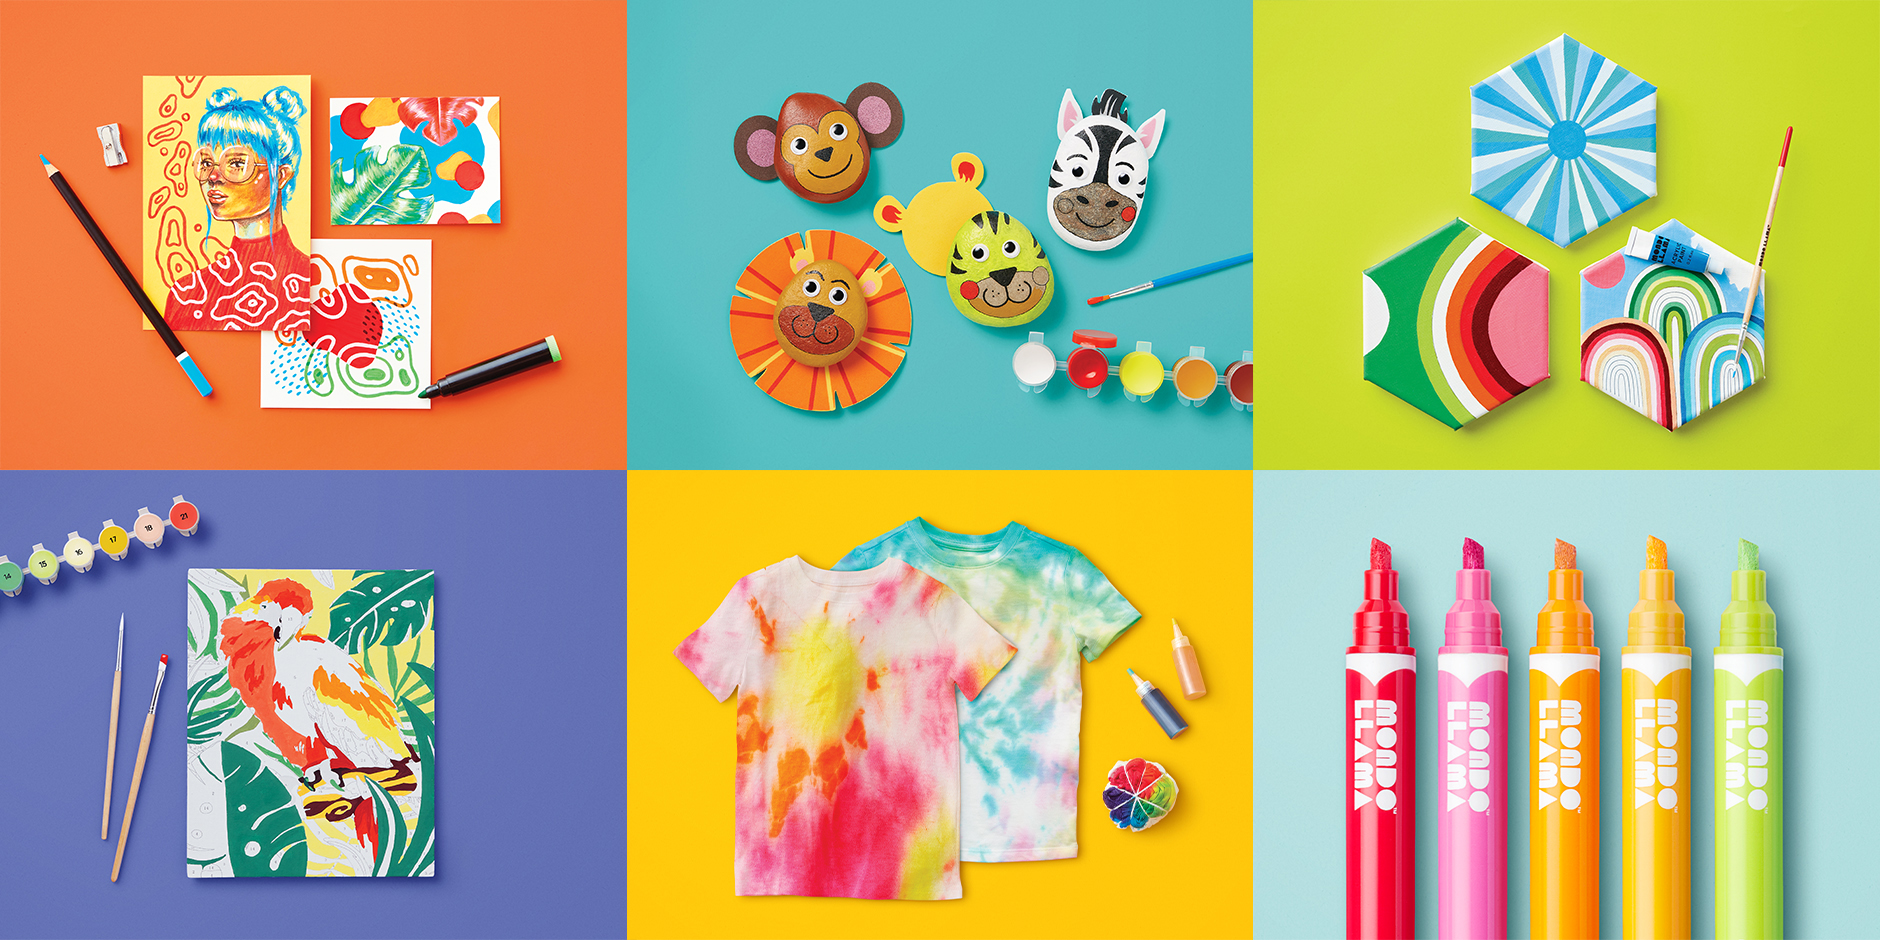 Six multicolored panels showing different crafts guest can make with the products, including wall art, tie-dye shirts, paper animal heads and more.